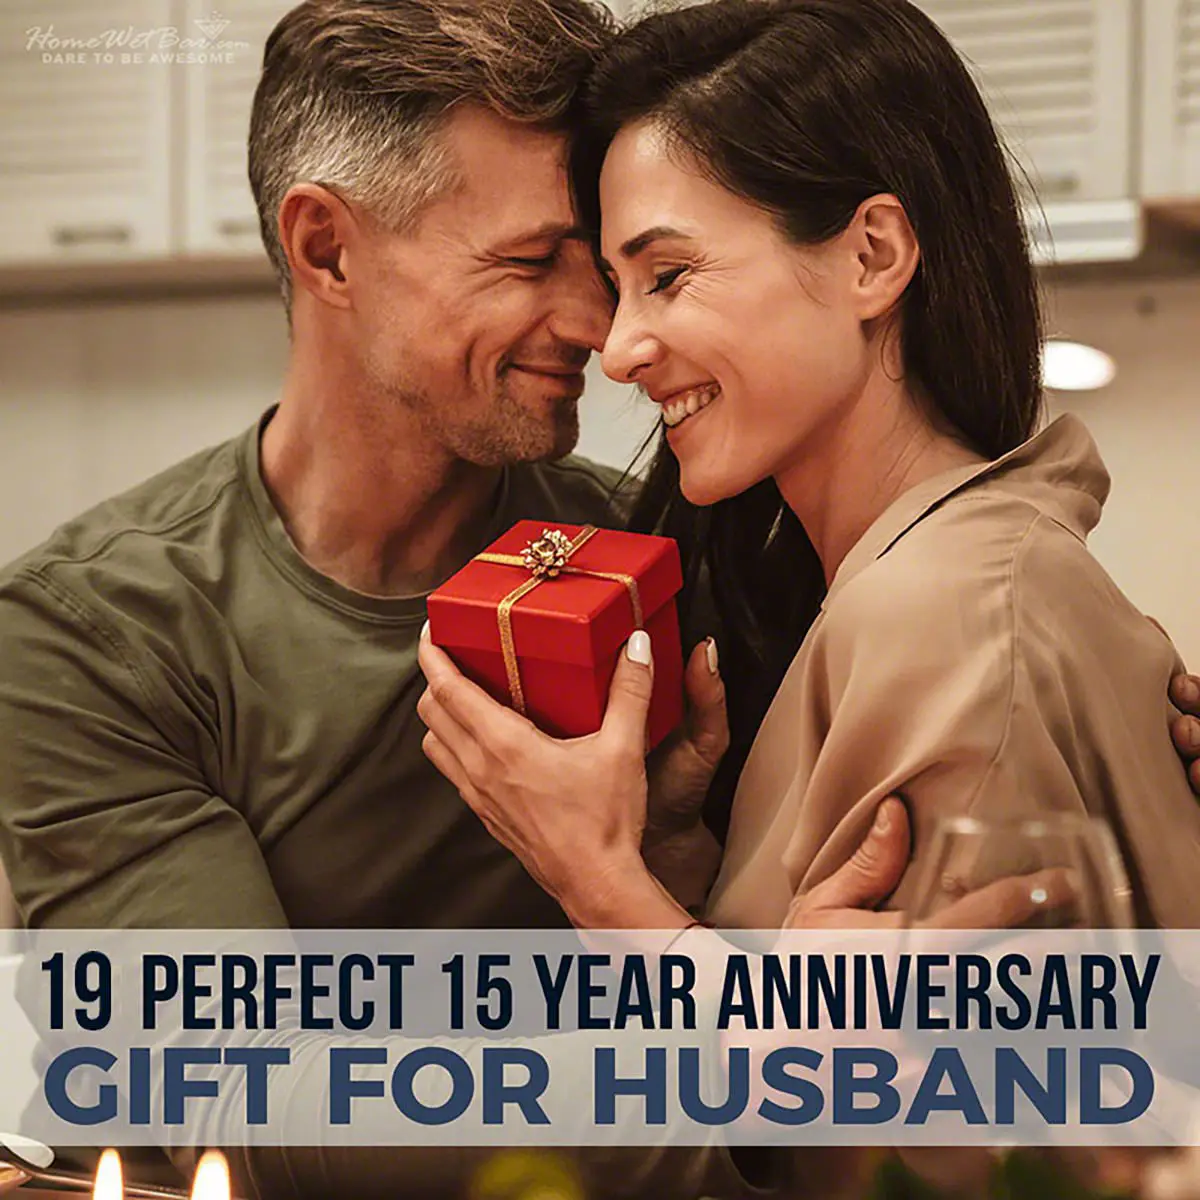 20 Best Wedding Anniversary Gifts For Husband-hangkhonggiare.com.vn